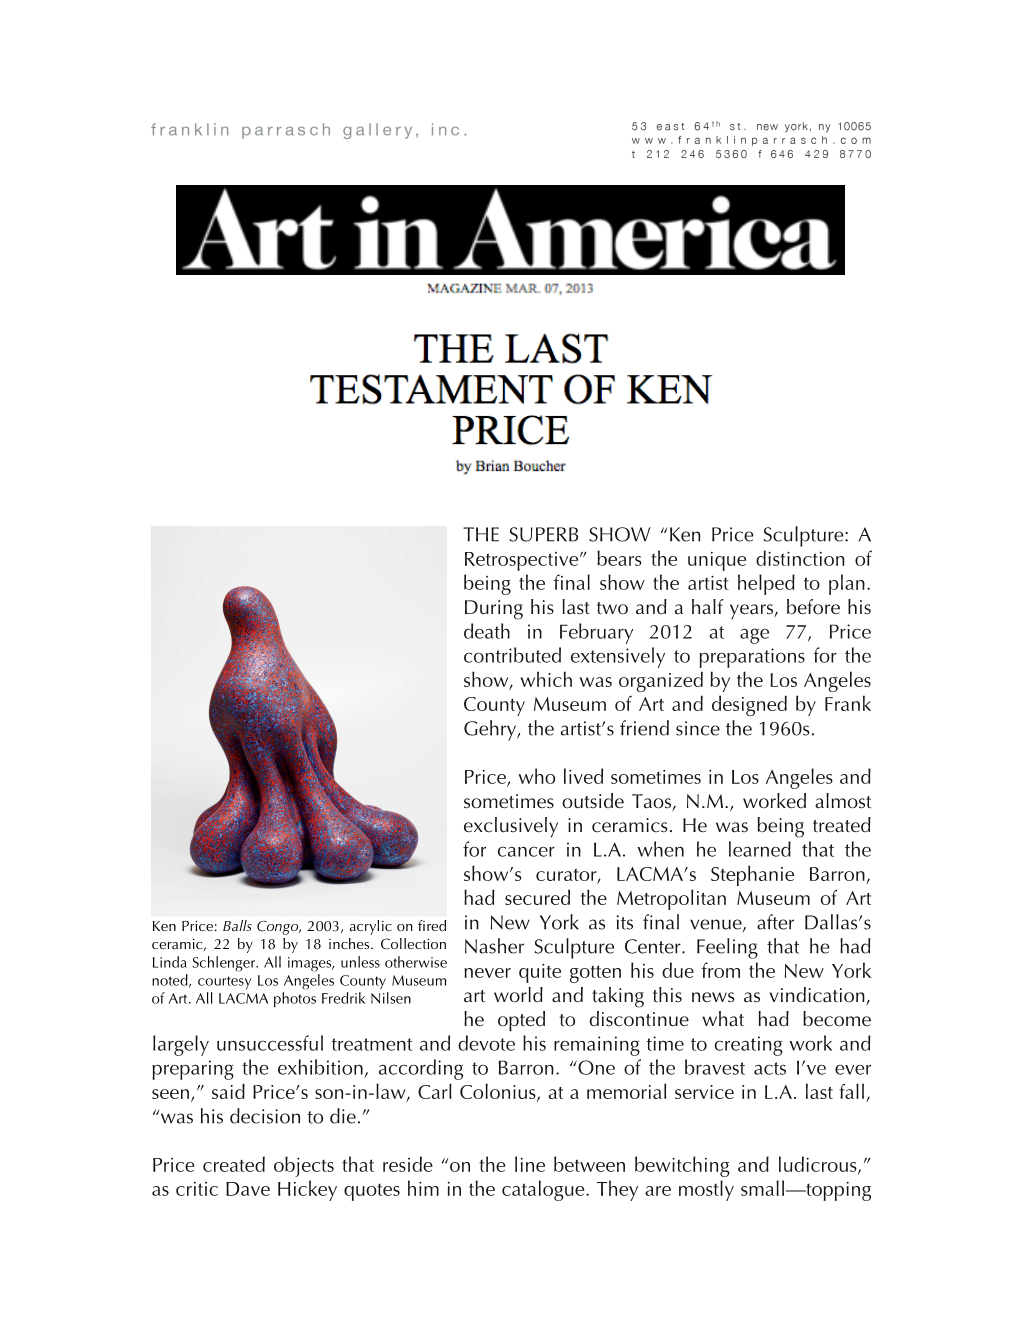 Ken Price Sculpture: a Retrospective” Bears the Unique Distinction of Being the Final Show the Artist Helped to Plan